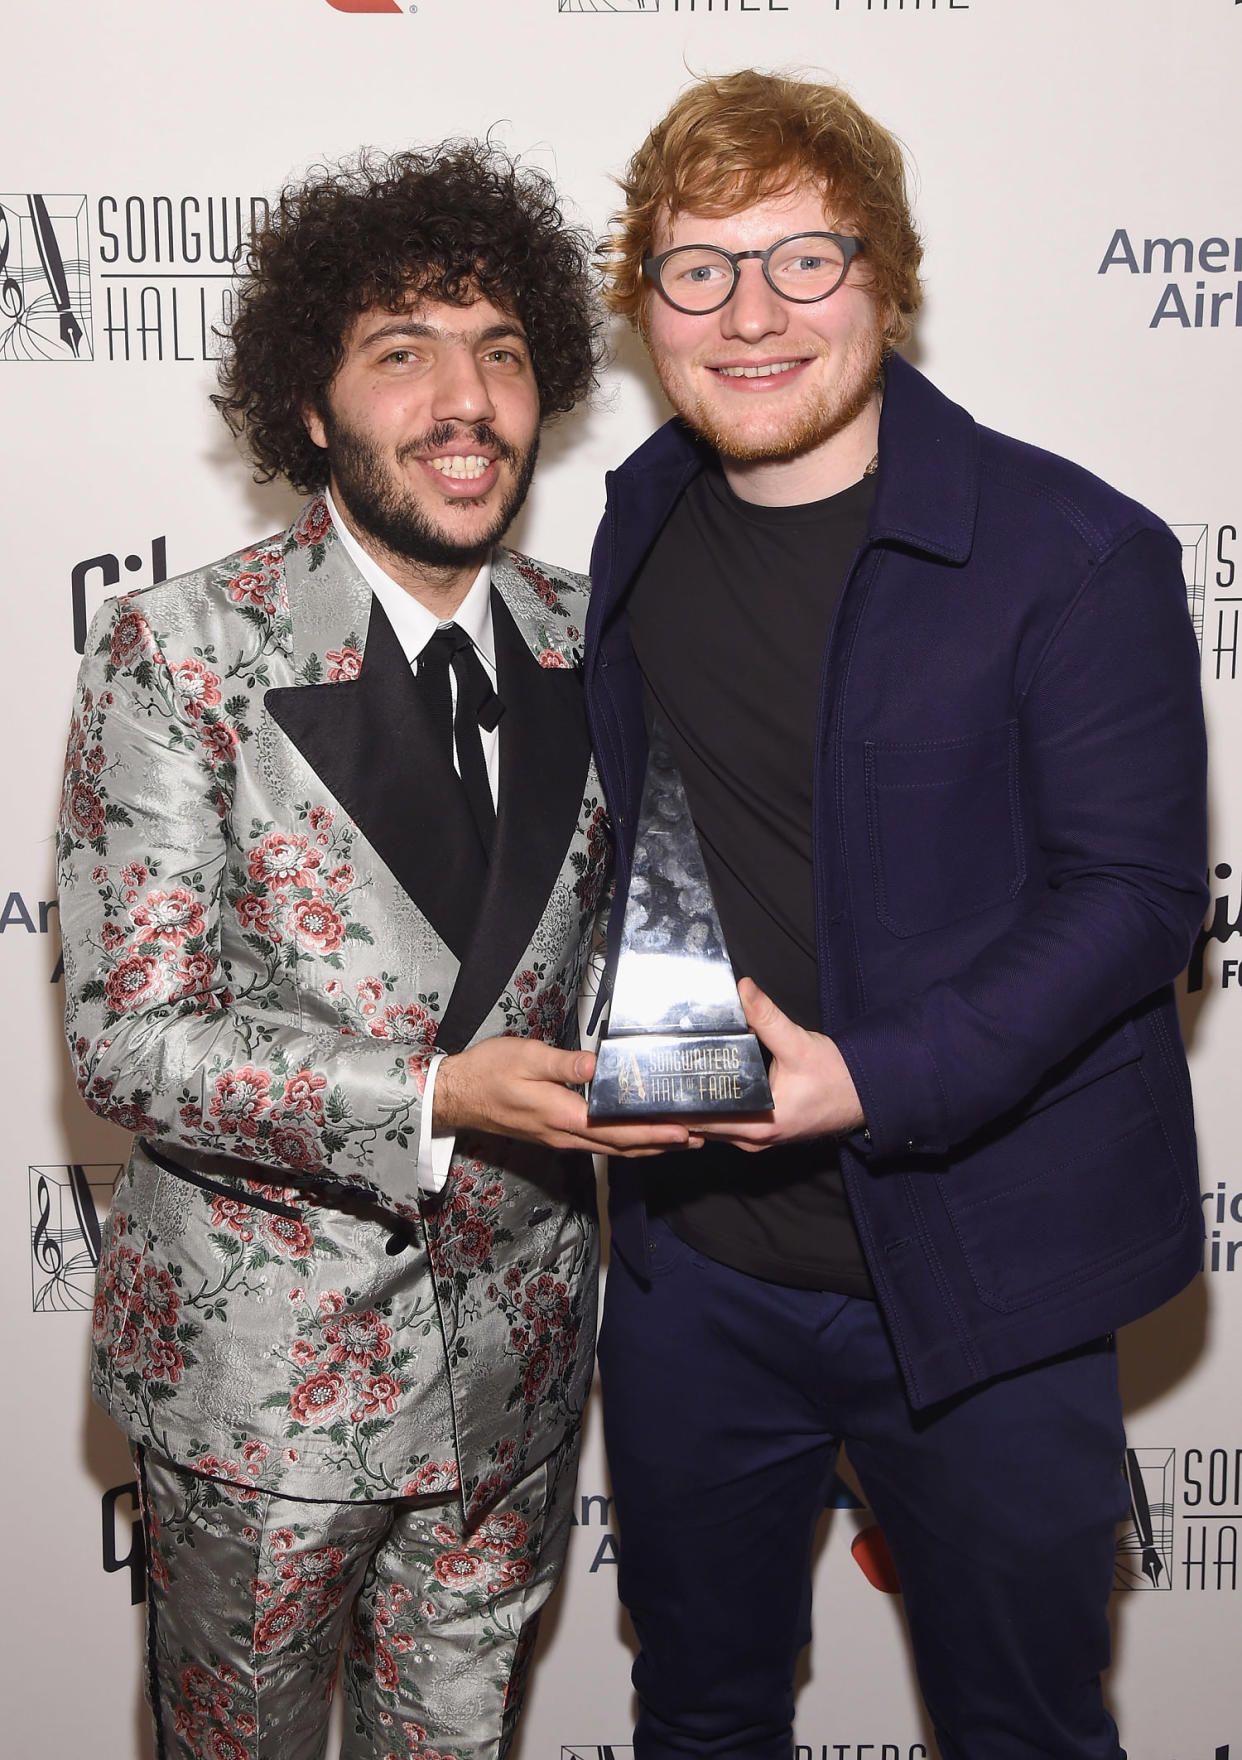 Benny Blanco with Ed Sheeran backstage at the Songwriters Hall of Fame 48th annual Induction and Awards at New York Marriott Marquis Hotel on June 15, 2017 in New York City. (Larry Busacca)